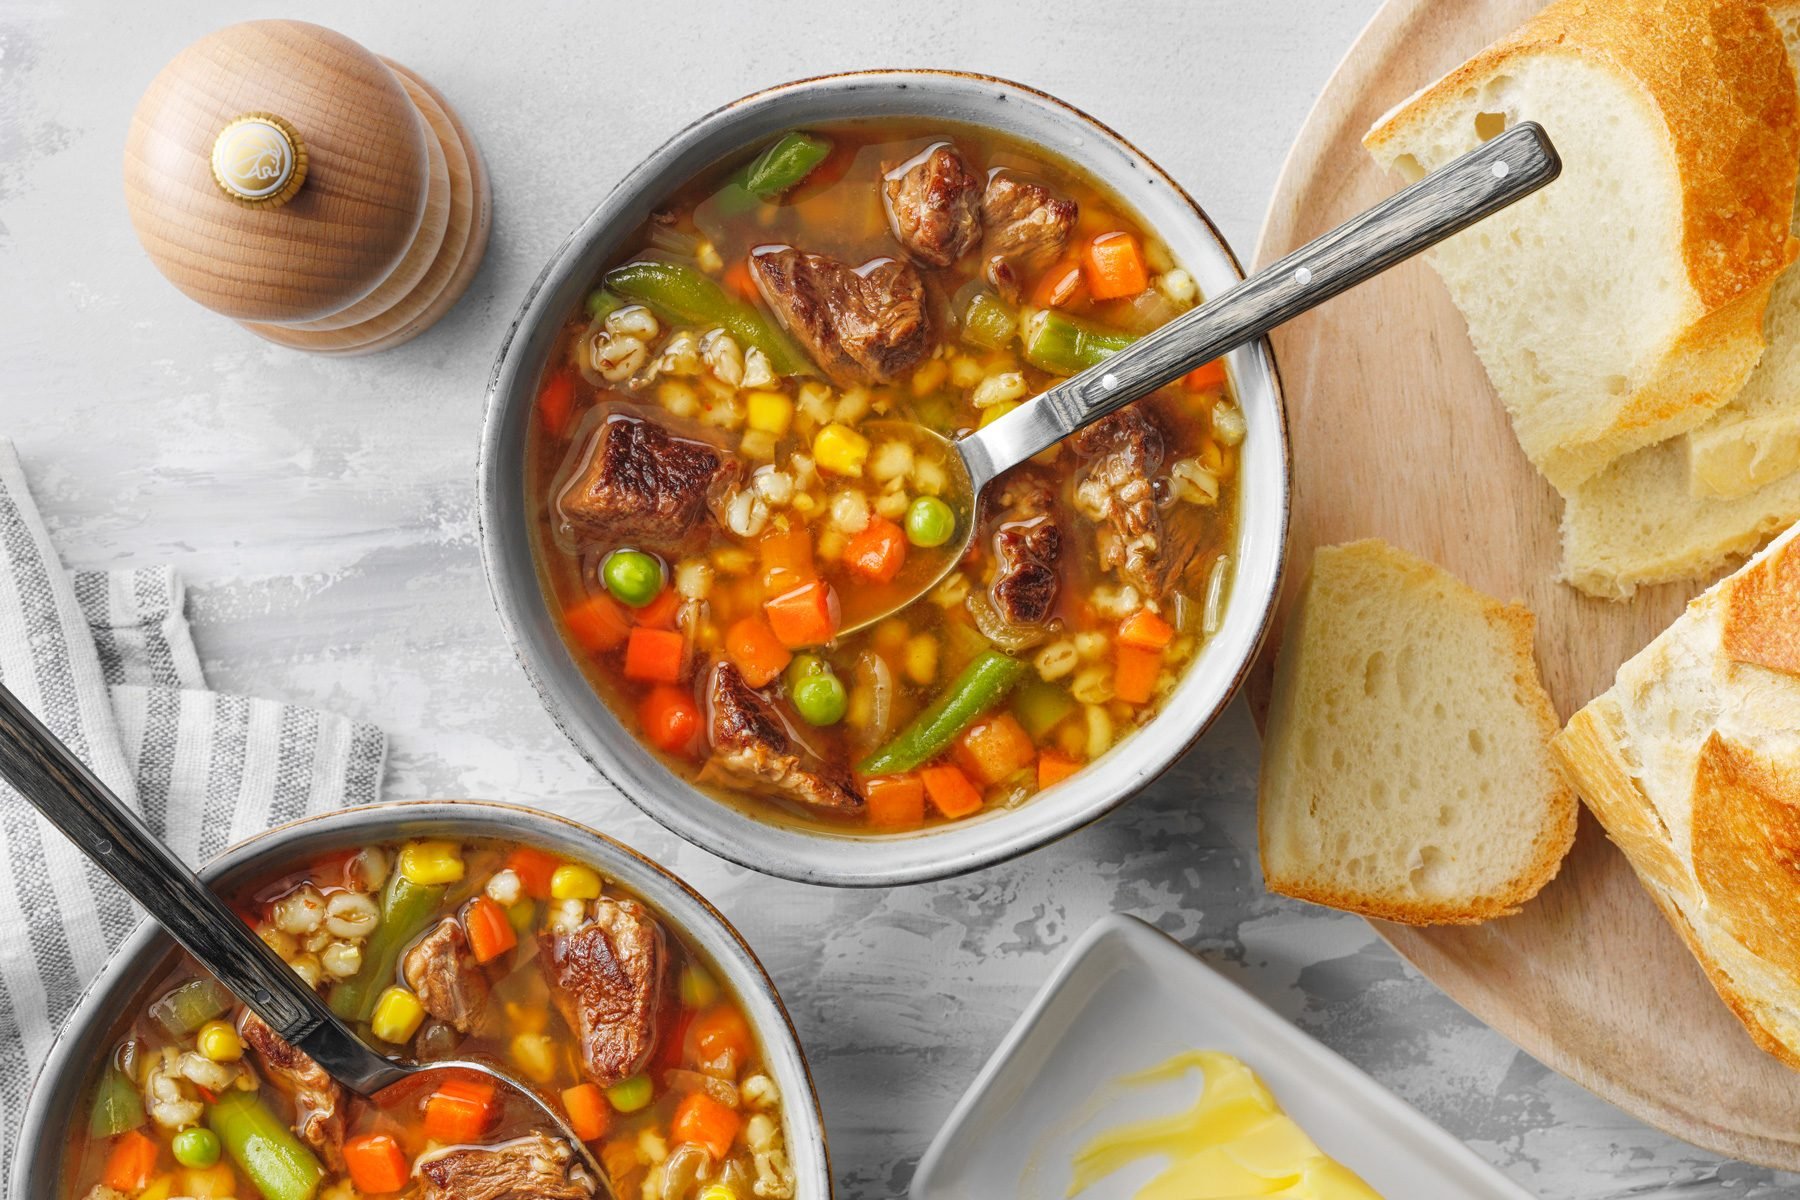 Slow Cooker Beef And Barley Soup in soup bowls served with bread